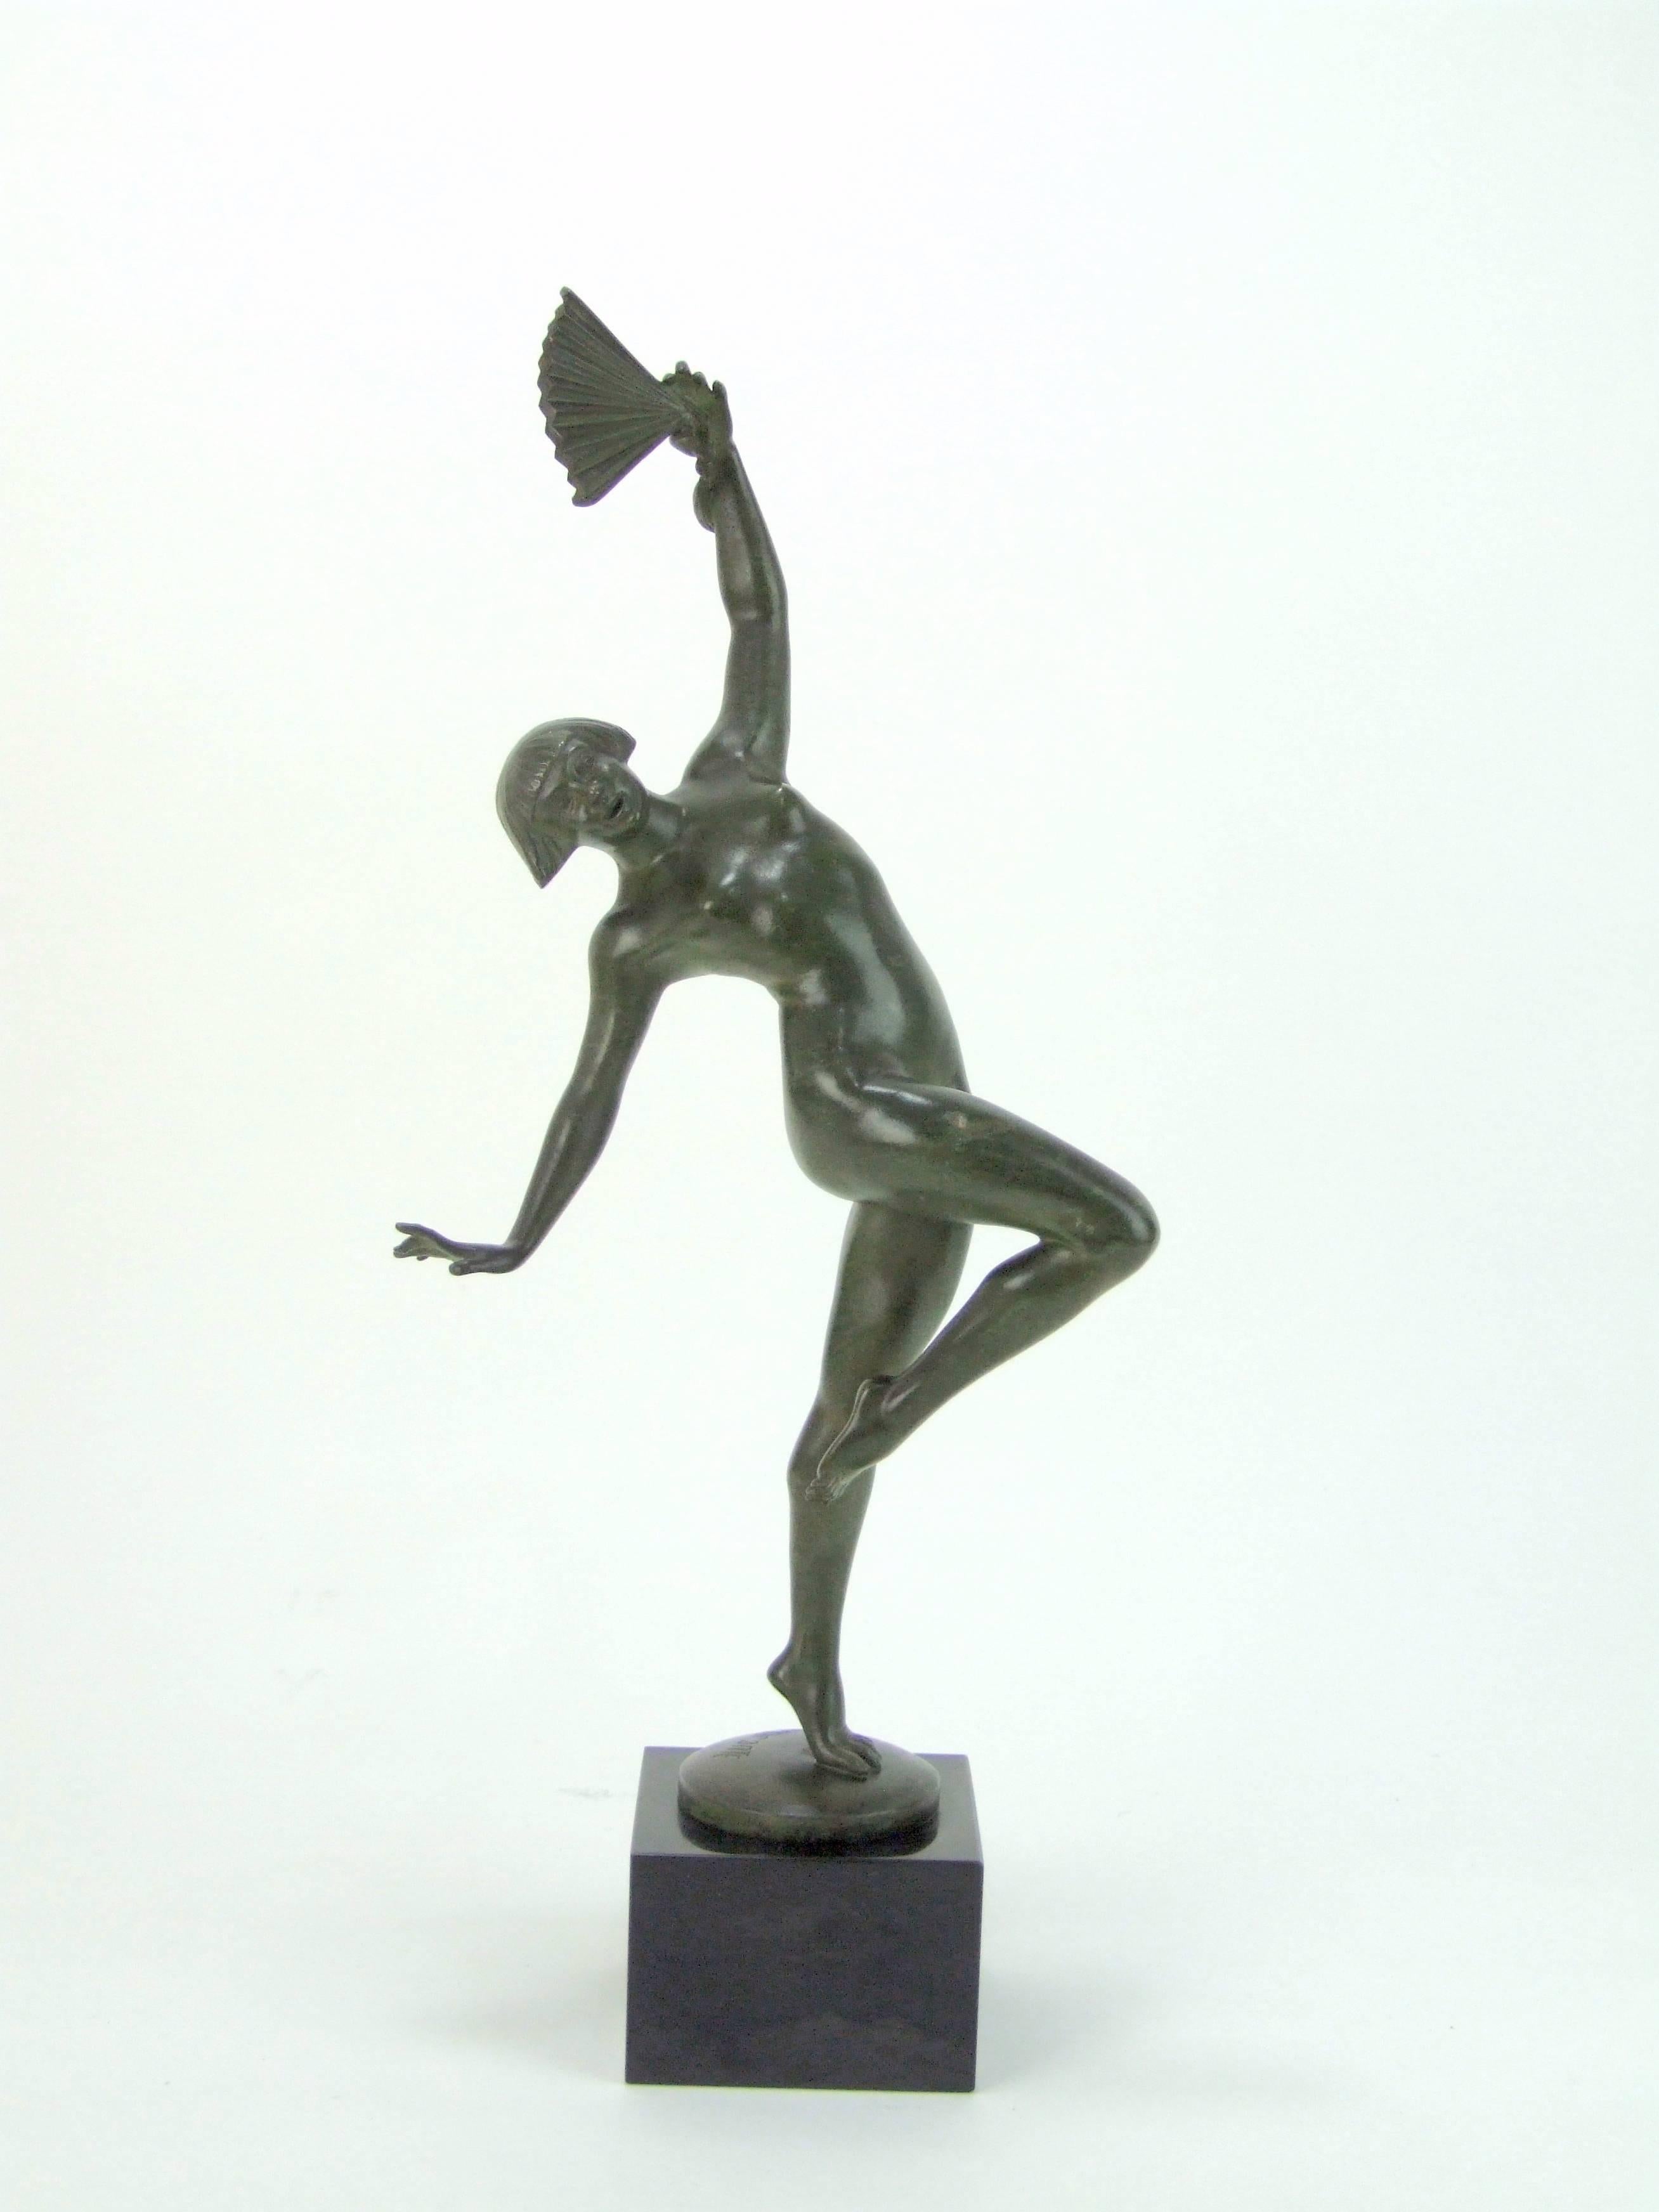 Large dark green patinated bronze nude dancer with a fan. A signed piece by Morante - signed in the bronze, circa 1925. Mounted on a black marble base. It measures 16 inches (41cm) high and she is 6 inches (15cm) at her widest point. Condition is